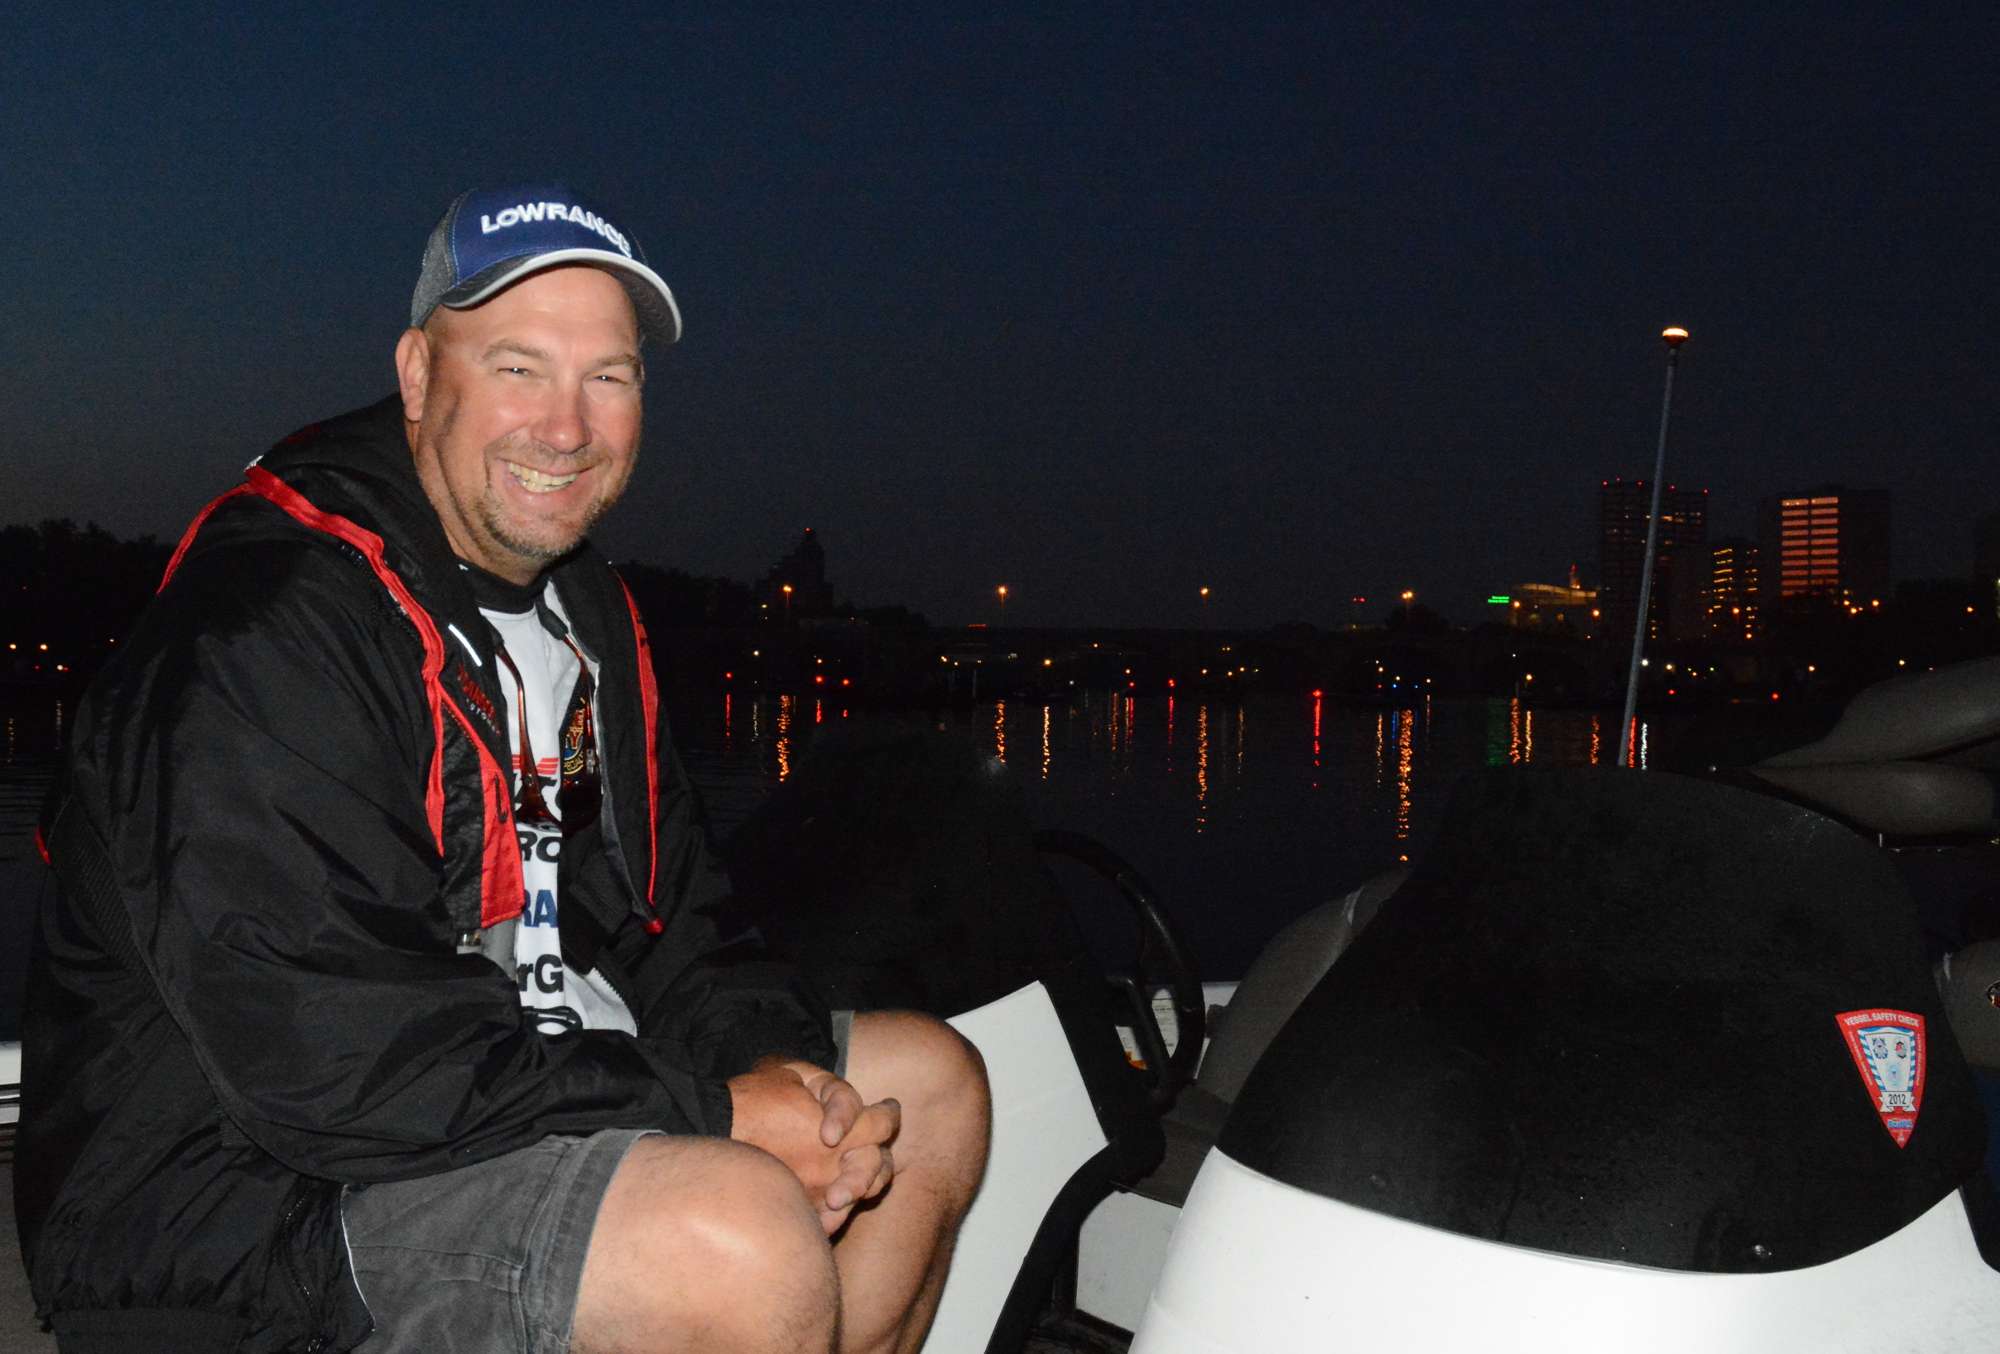 ... and Biron is holding down the next-to-last spot for Connecticut. Both anglers are hoping to upgrade today.